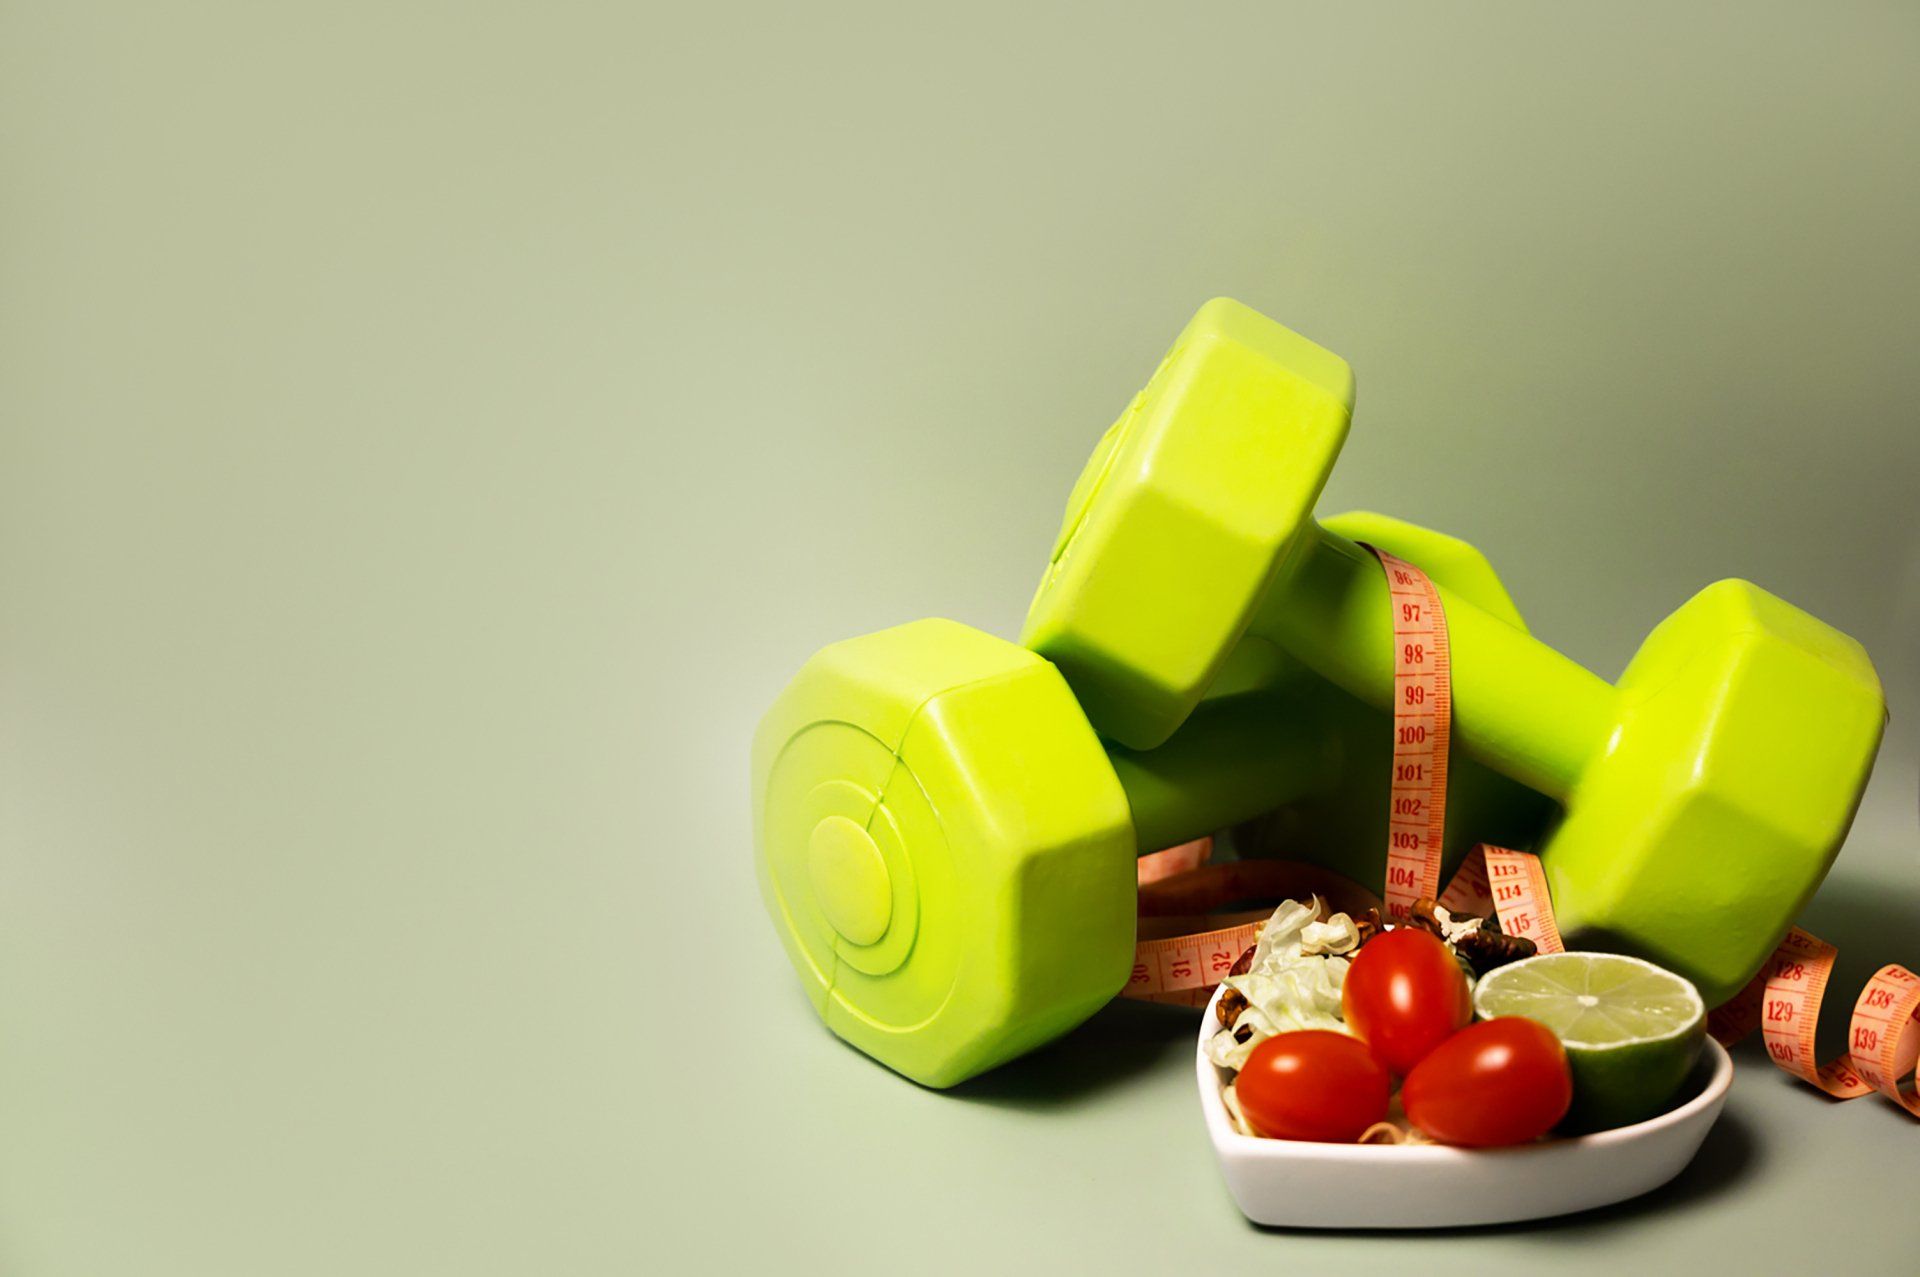 Healthy lifestyle and food concept.Sporty lifestyle. Workouts. Vegetables, fruits are near dumbbells.